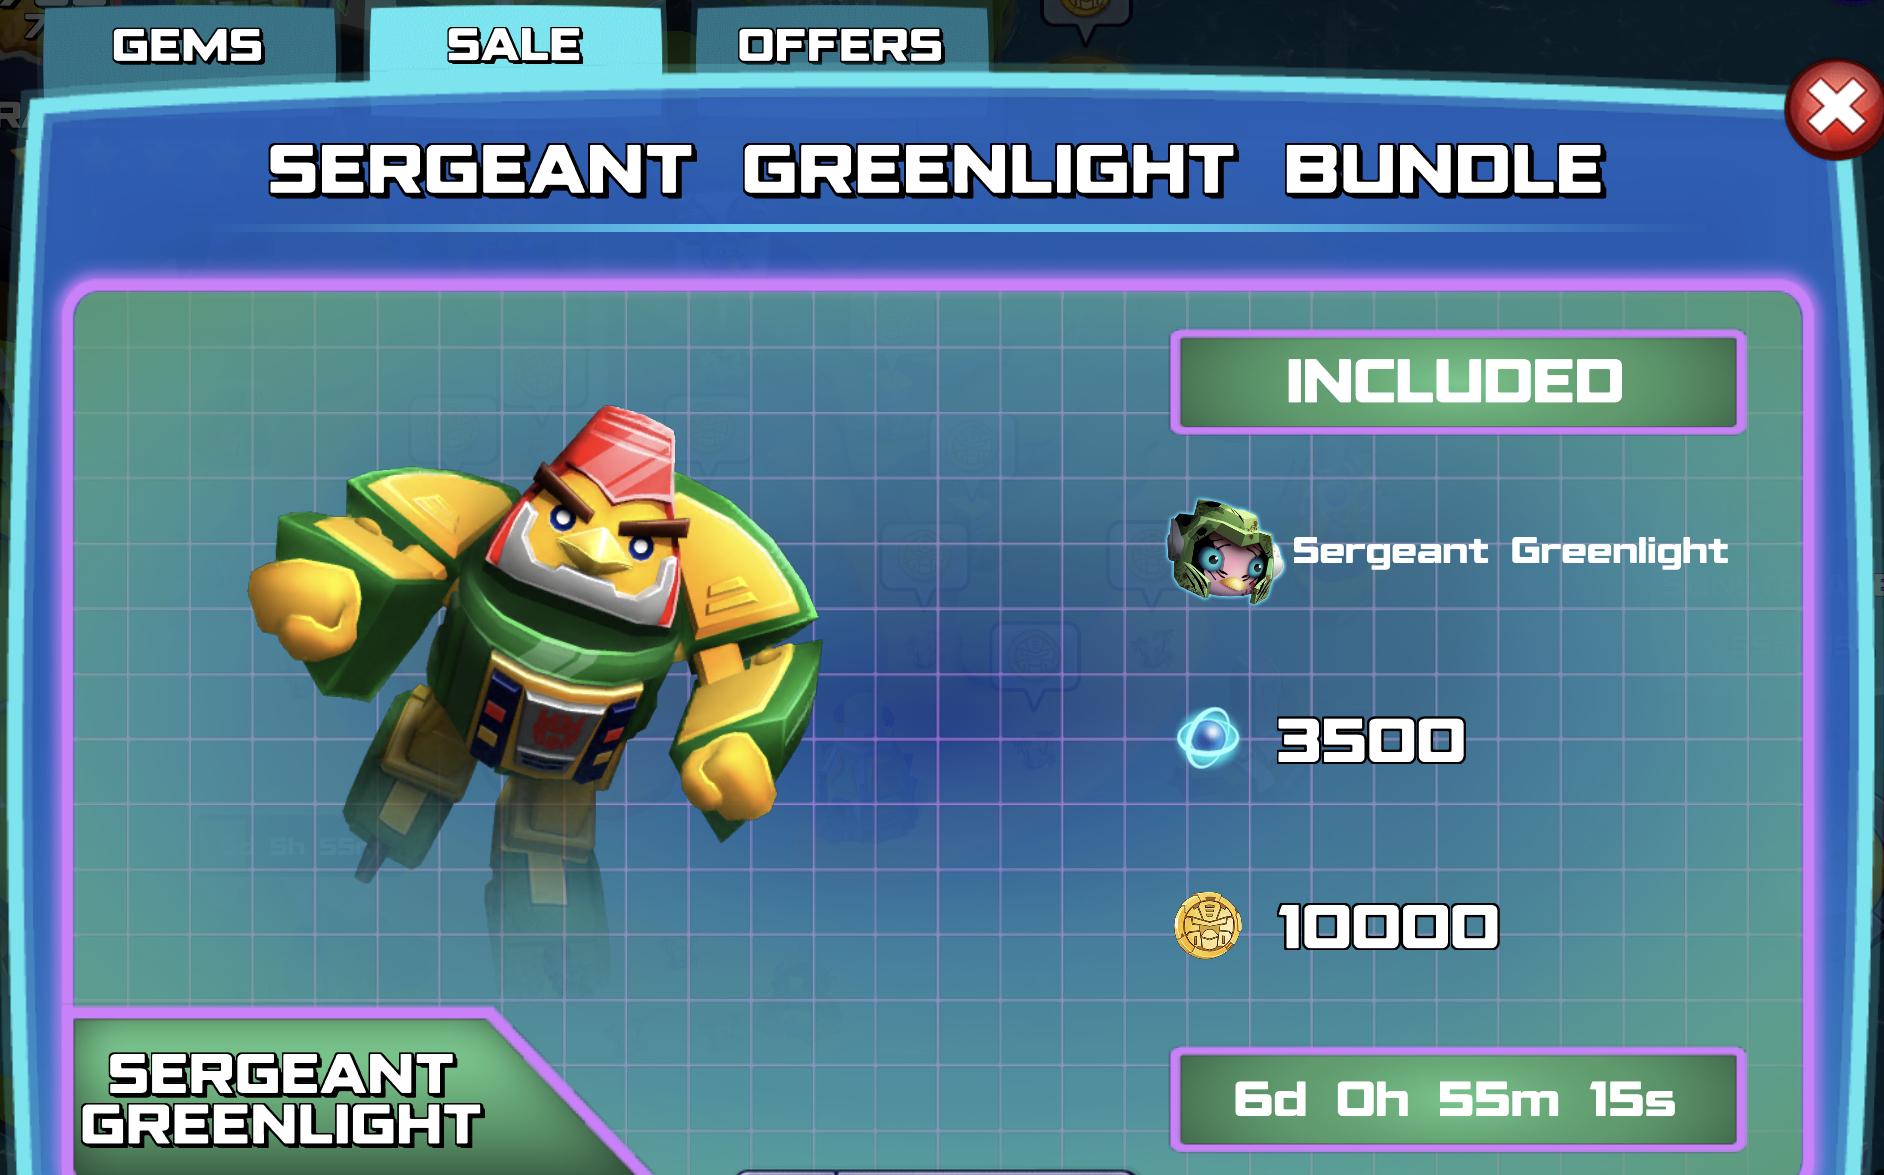 Sergeant Greenlight offer but seeing also Cosmos